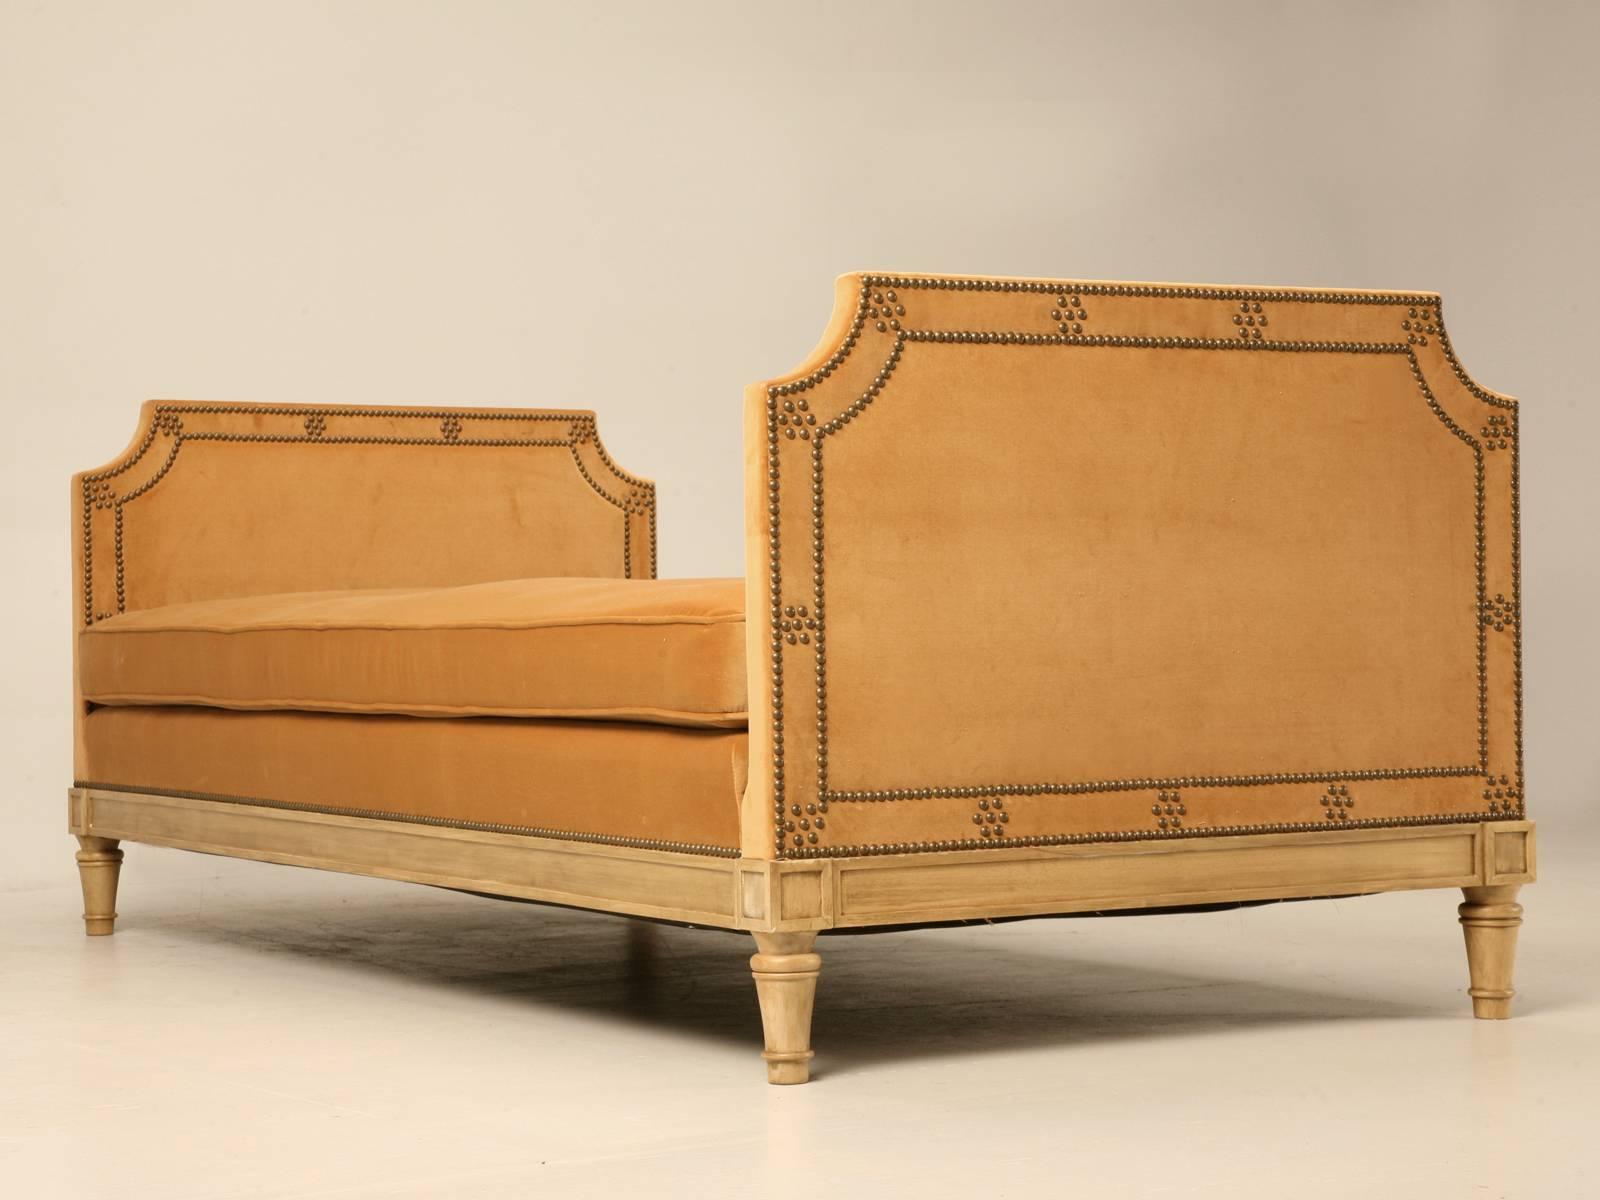 Upholstery Custom Old Plank Upholstered Daybed Made to Order in Our Workshop Any Dimension For Sale